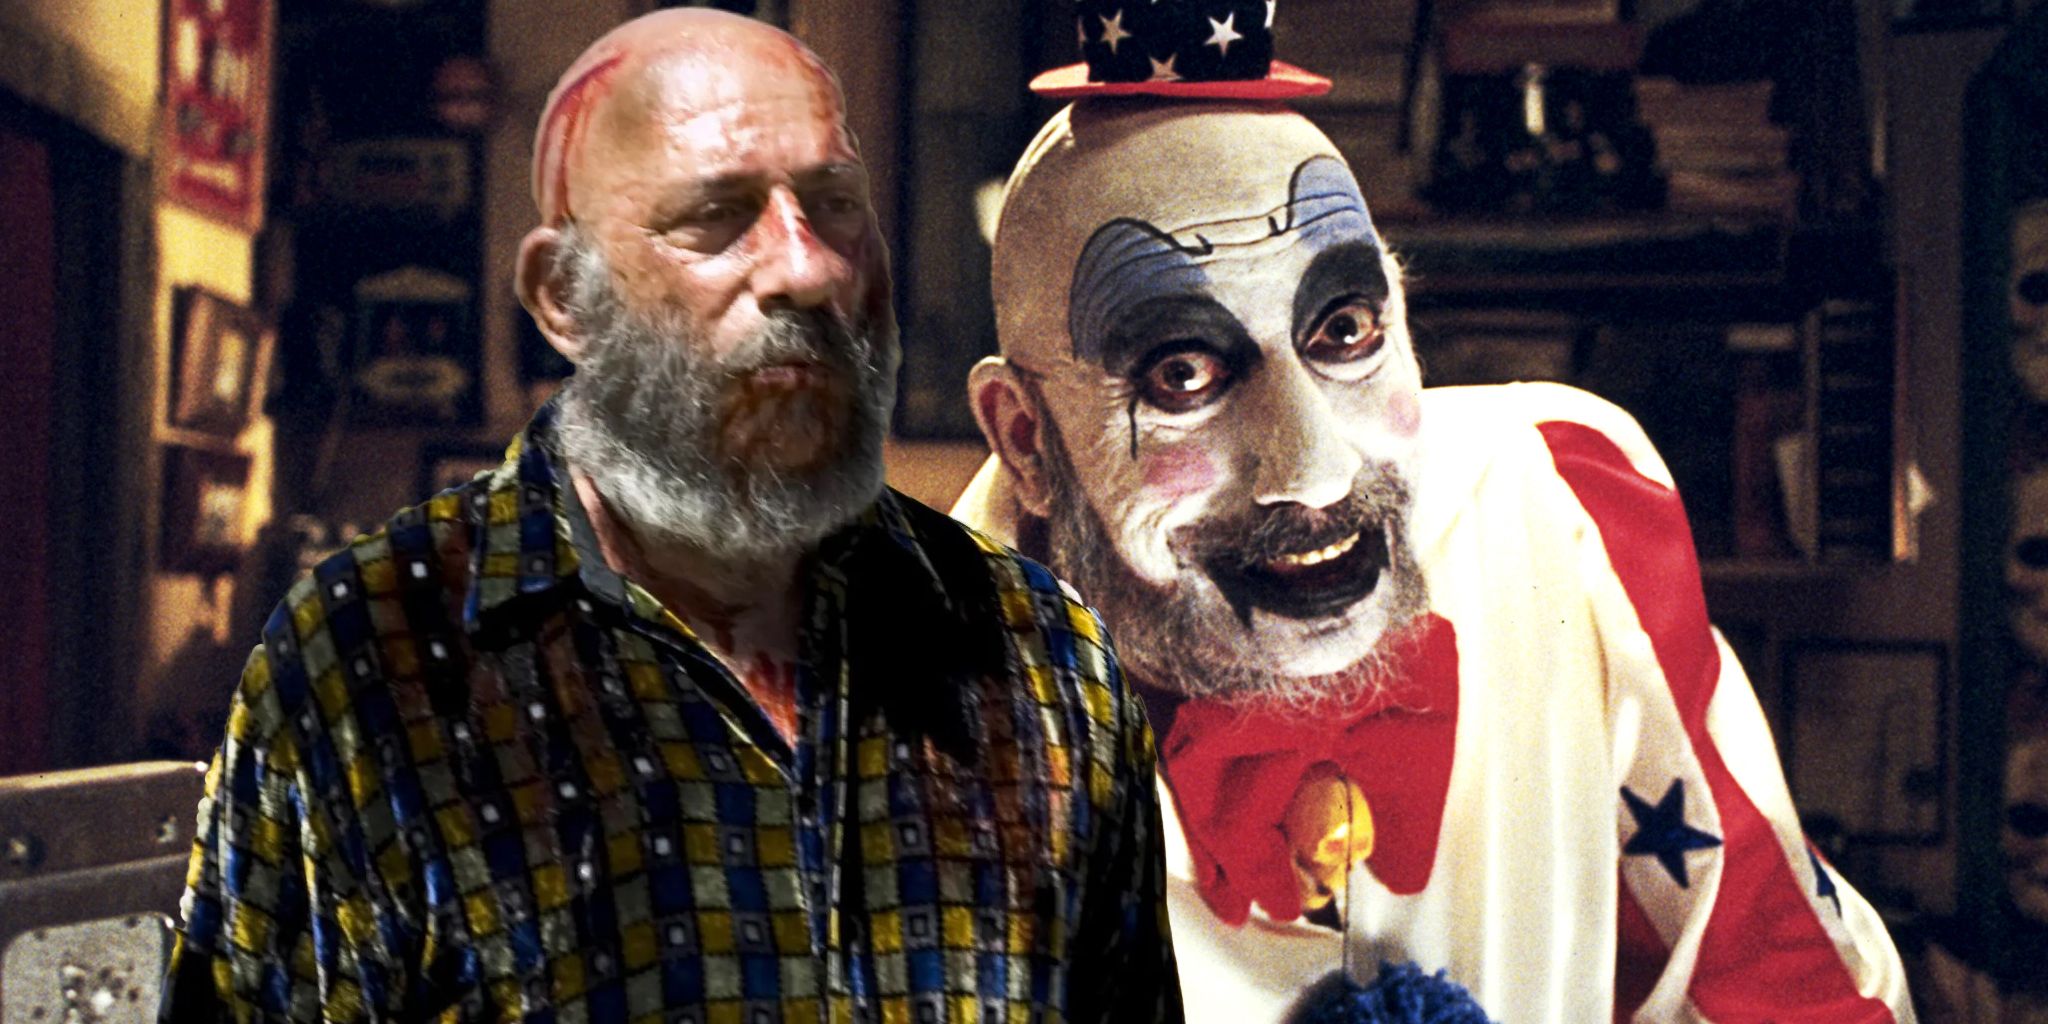 Captain Spaulding - Devil's Rejects and House of 1000 Corpses